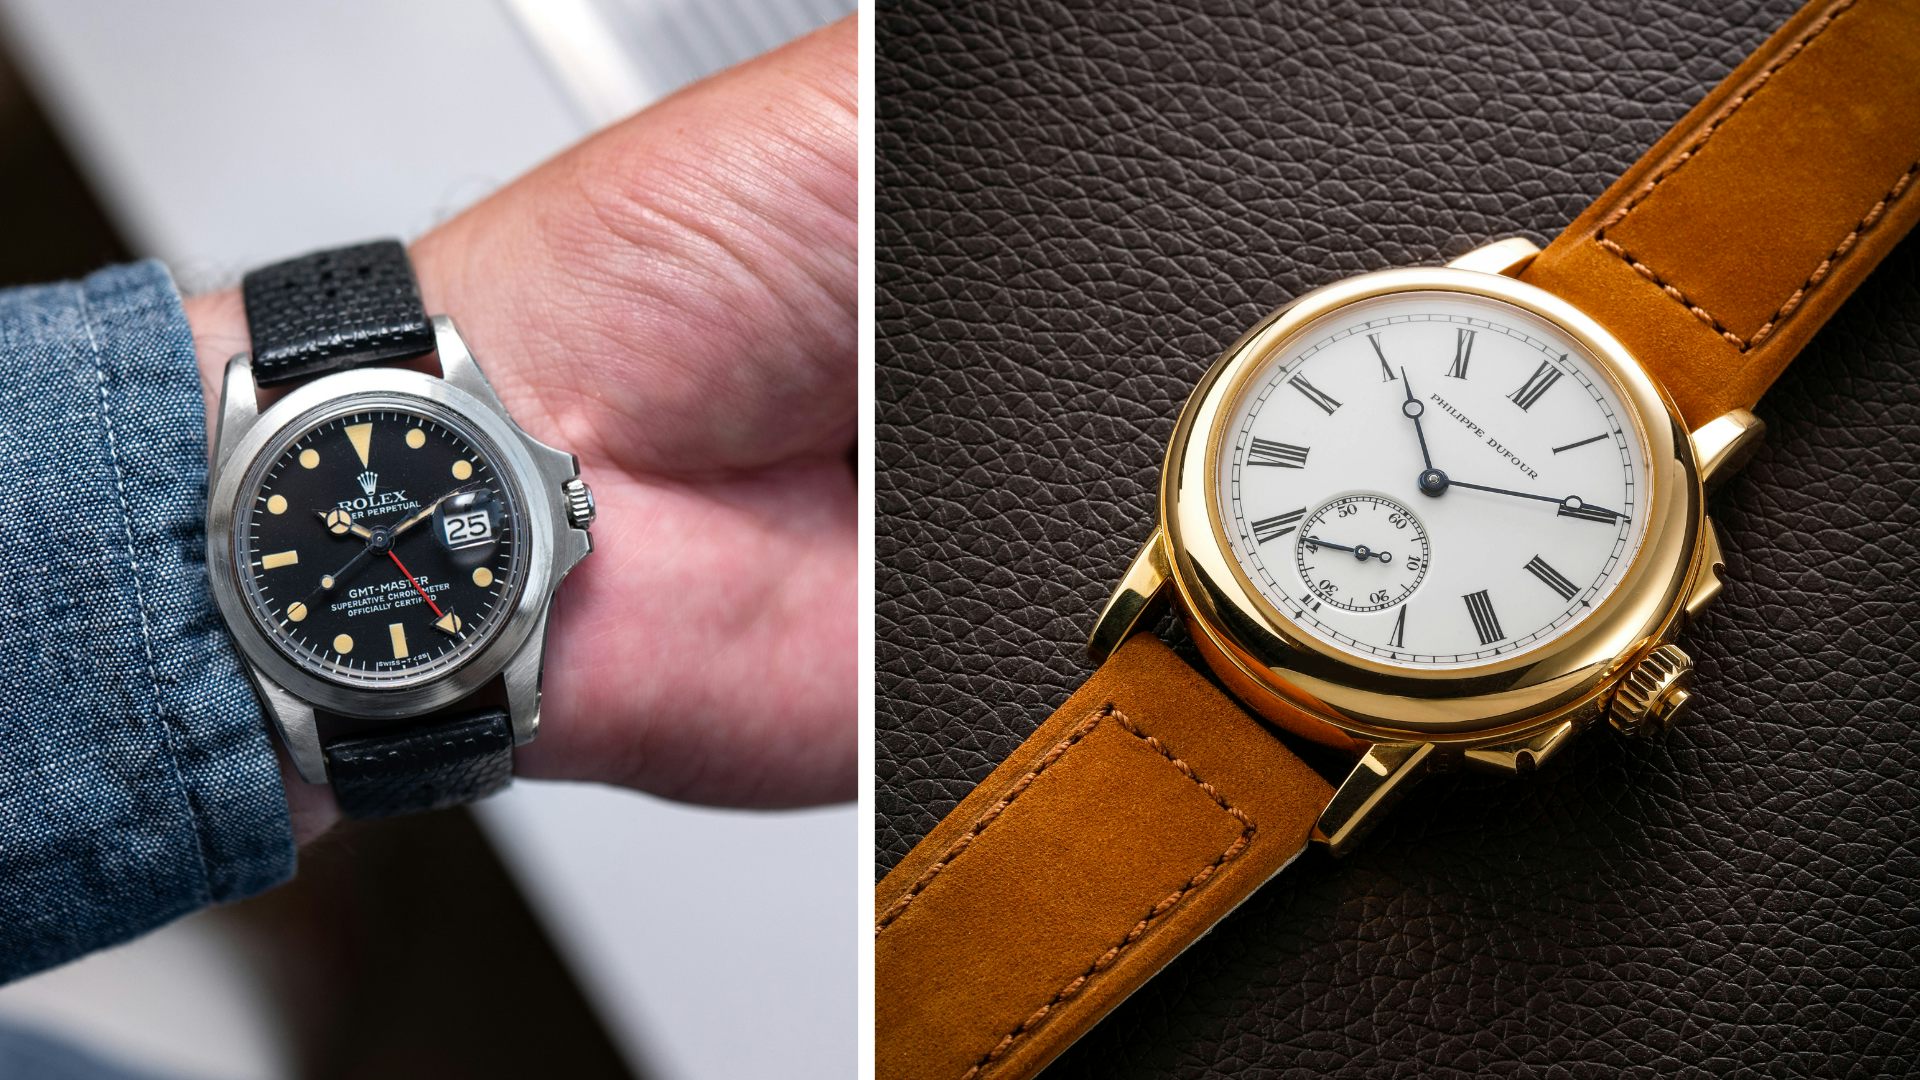 Top 10+ Must-Know Luxury Watch Brands in 2022